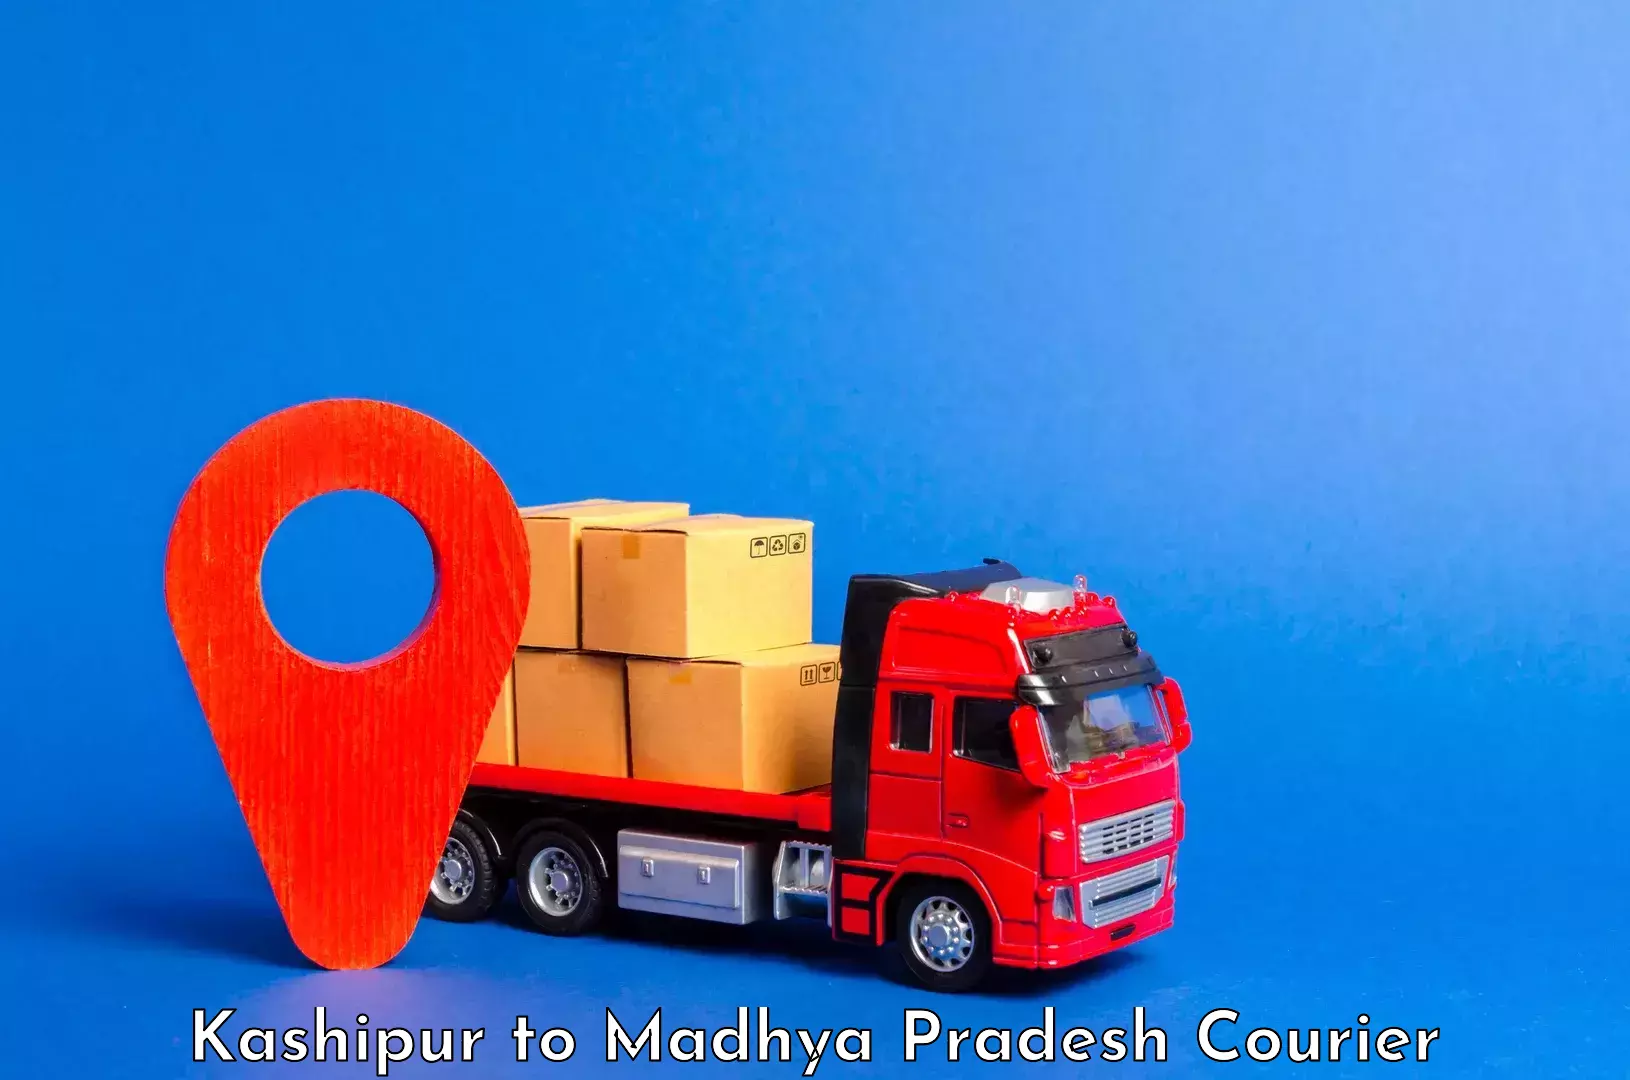 Airport luggage delivery in Kashipur to Churhat